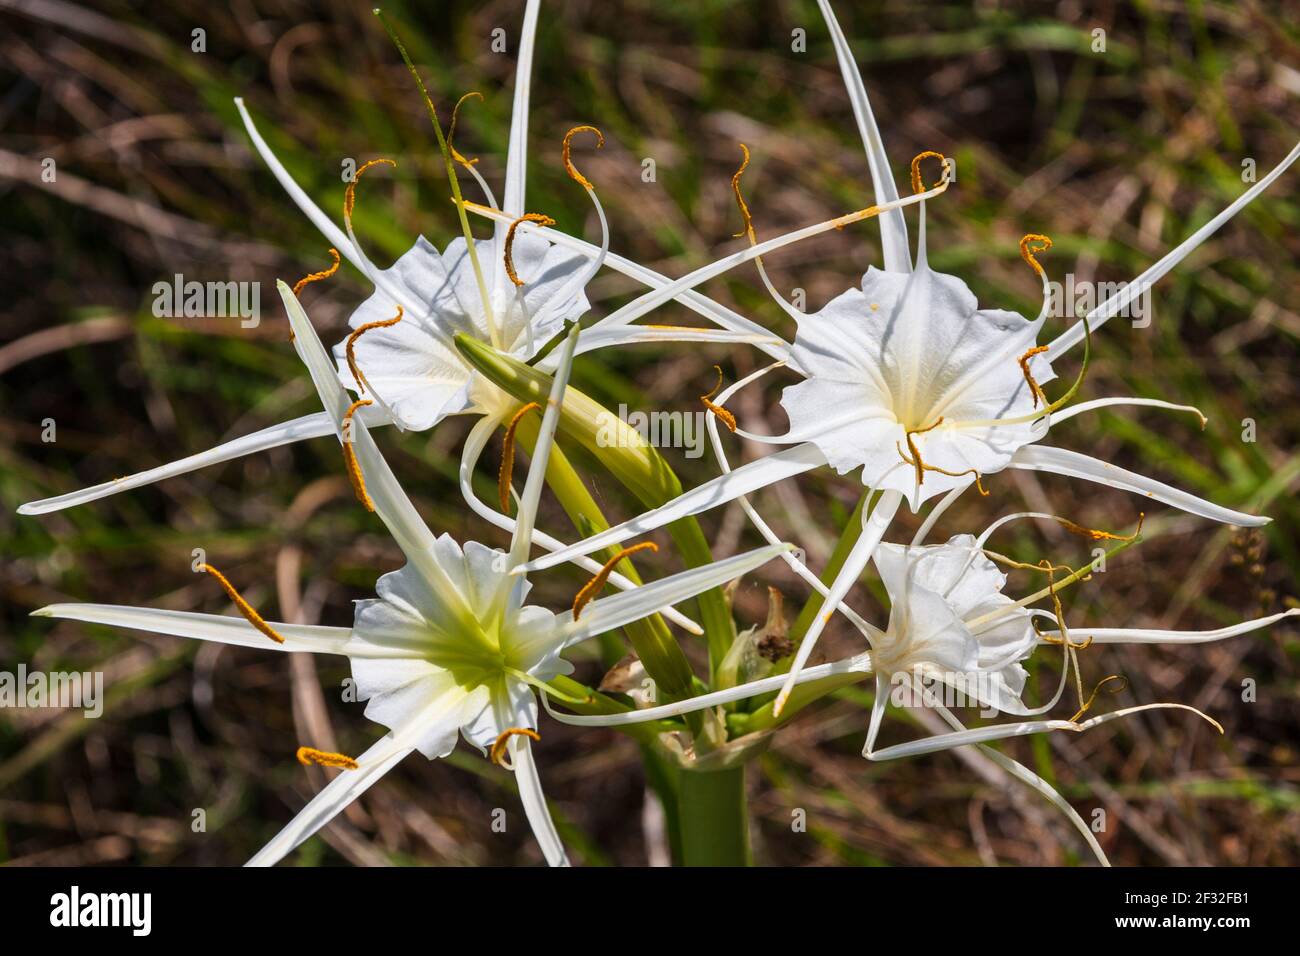 Spider Lily, Hymenocallis liriosme, growing wild on the roadside and in nearby fields, along Texas highway 382 near Whitehall, Texas. Stock Photo